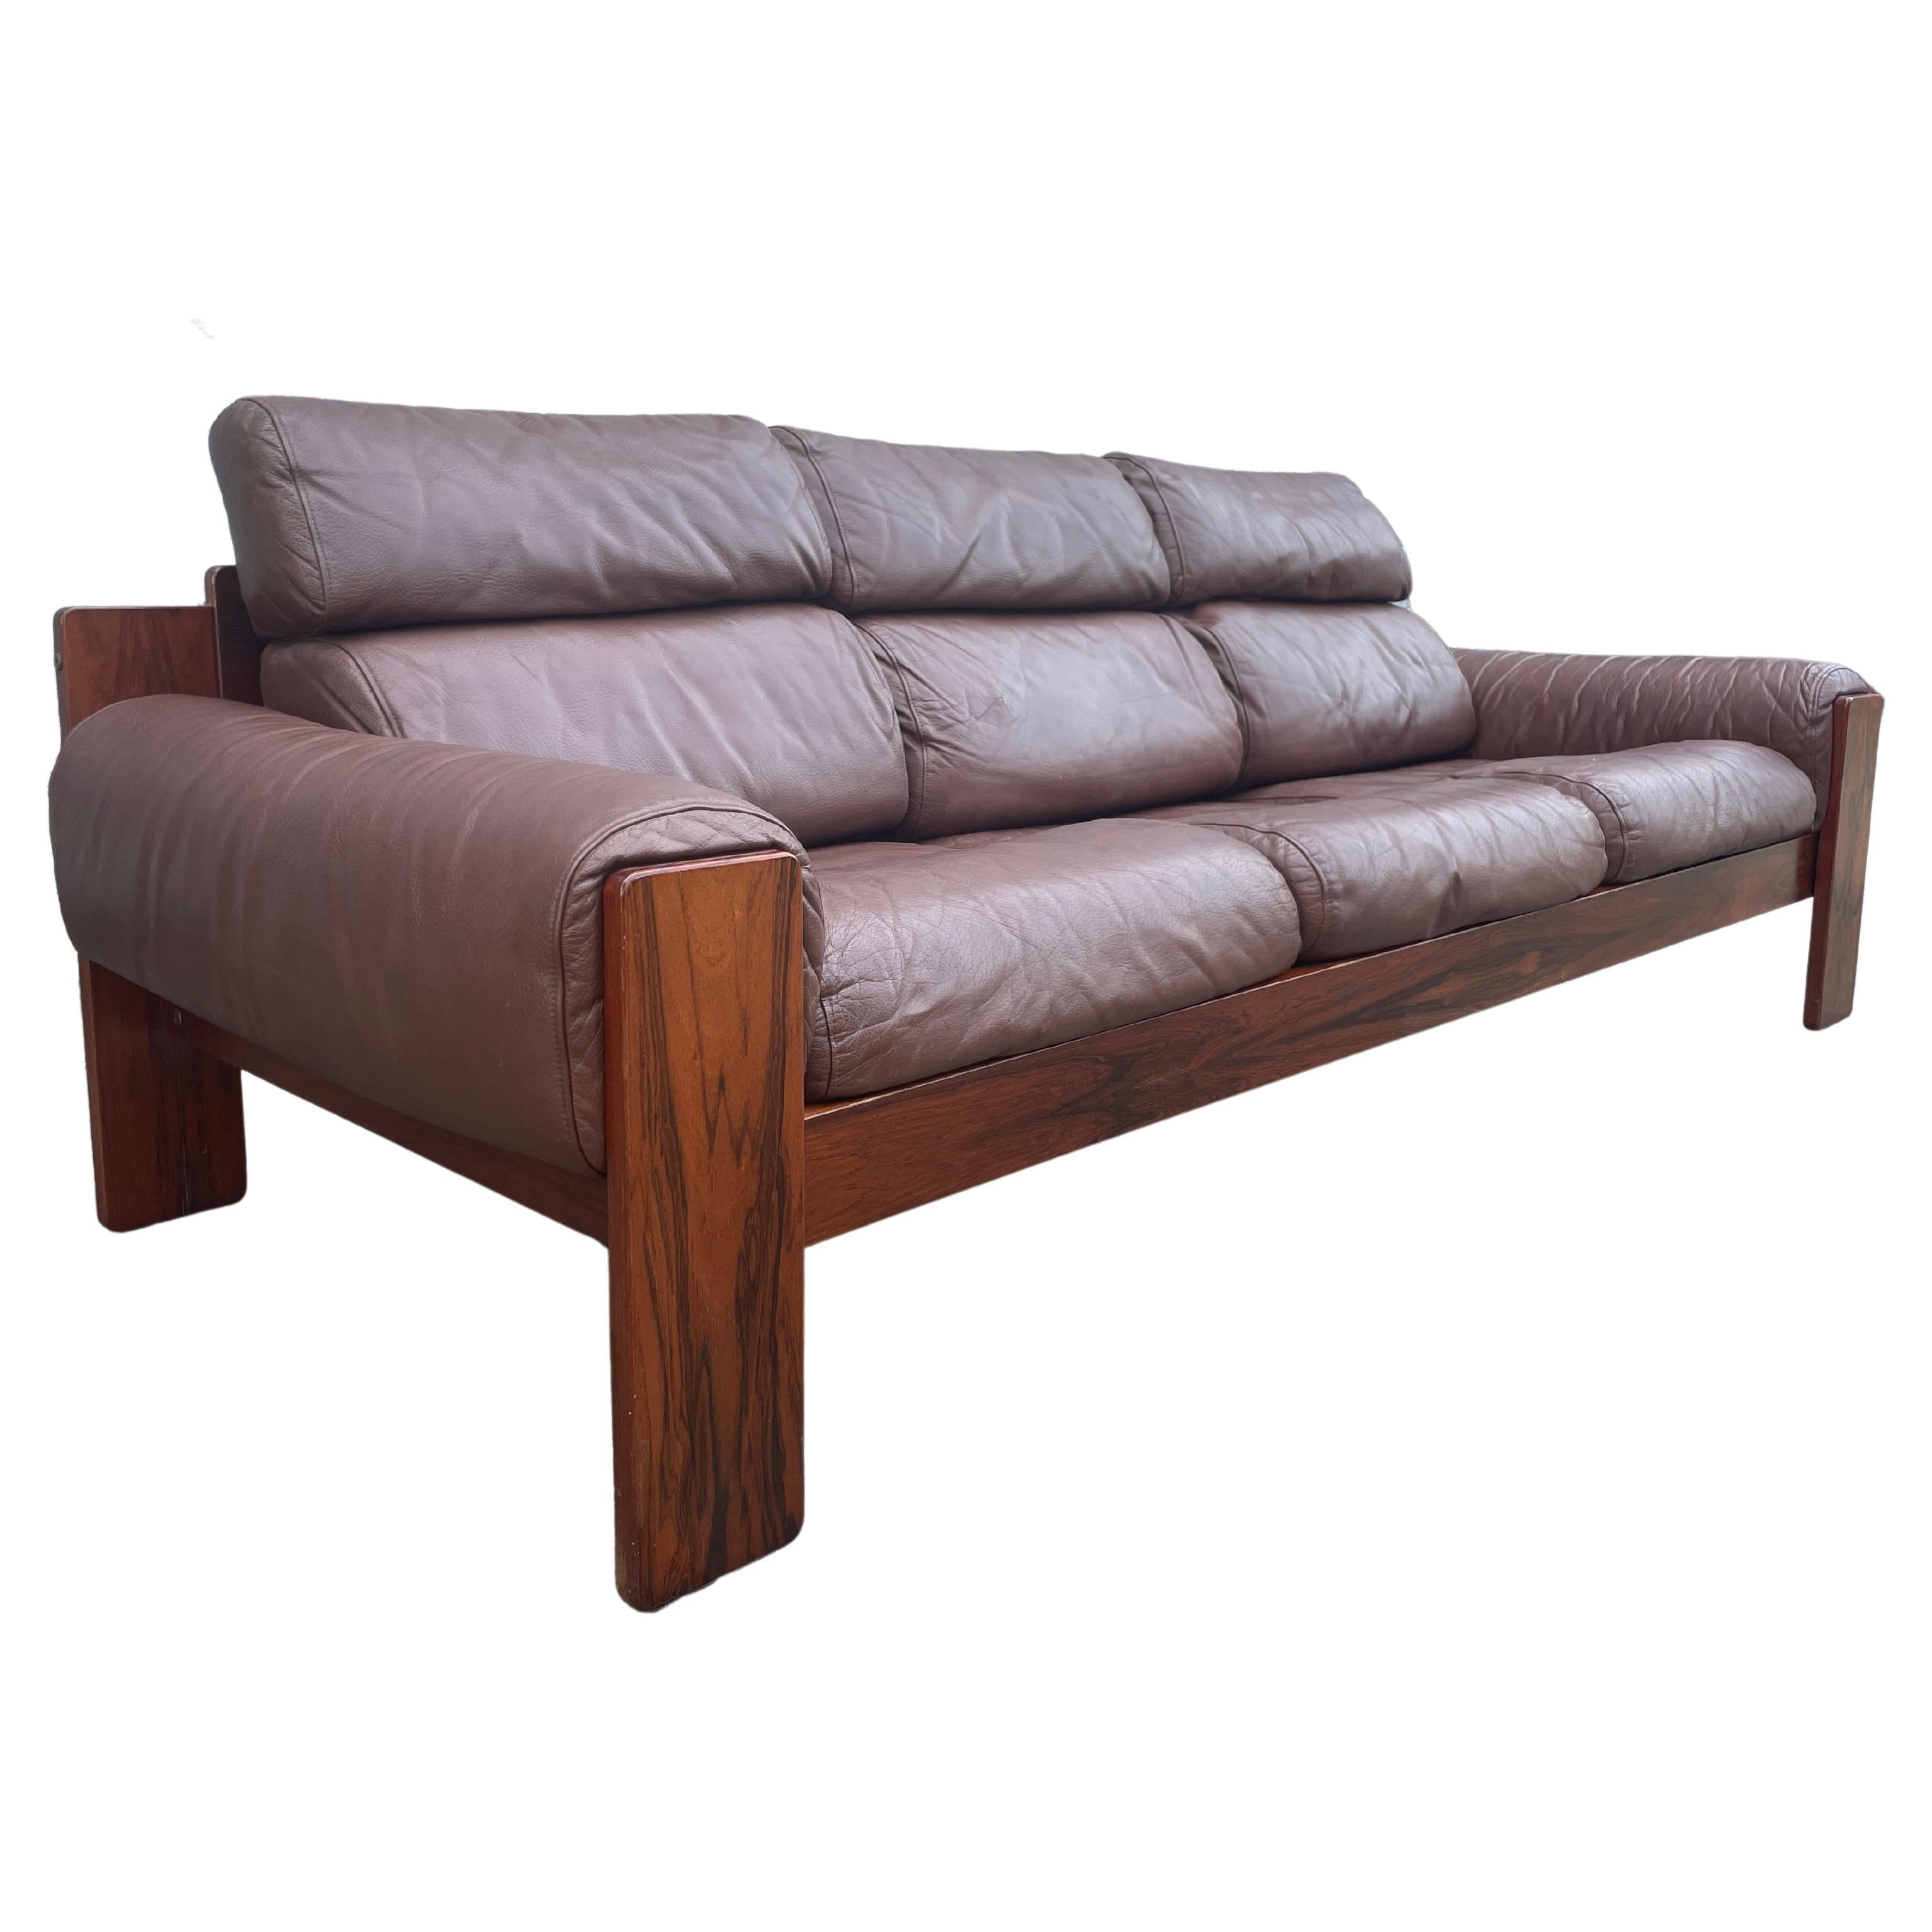 Superb mid-century Scandinavian flat rosewood frame is low profile with Soft padded Brown colored leather cushions. Very cozy low Scandinavian modern design by Uu-Vee Kaluste Oy of Finland. Circa late 1960. Very very clean and shows very light use.